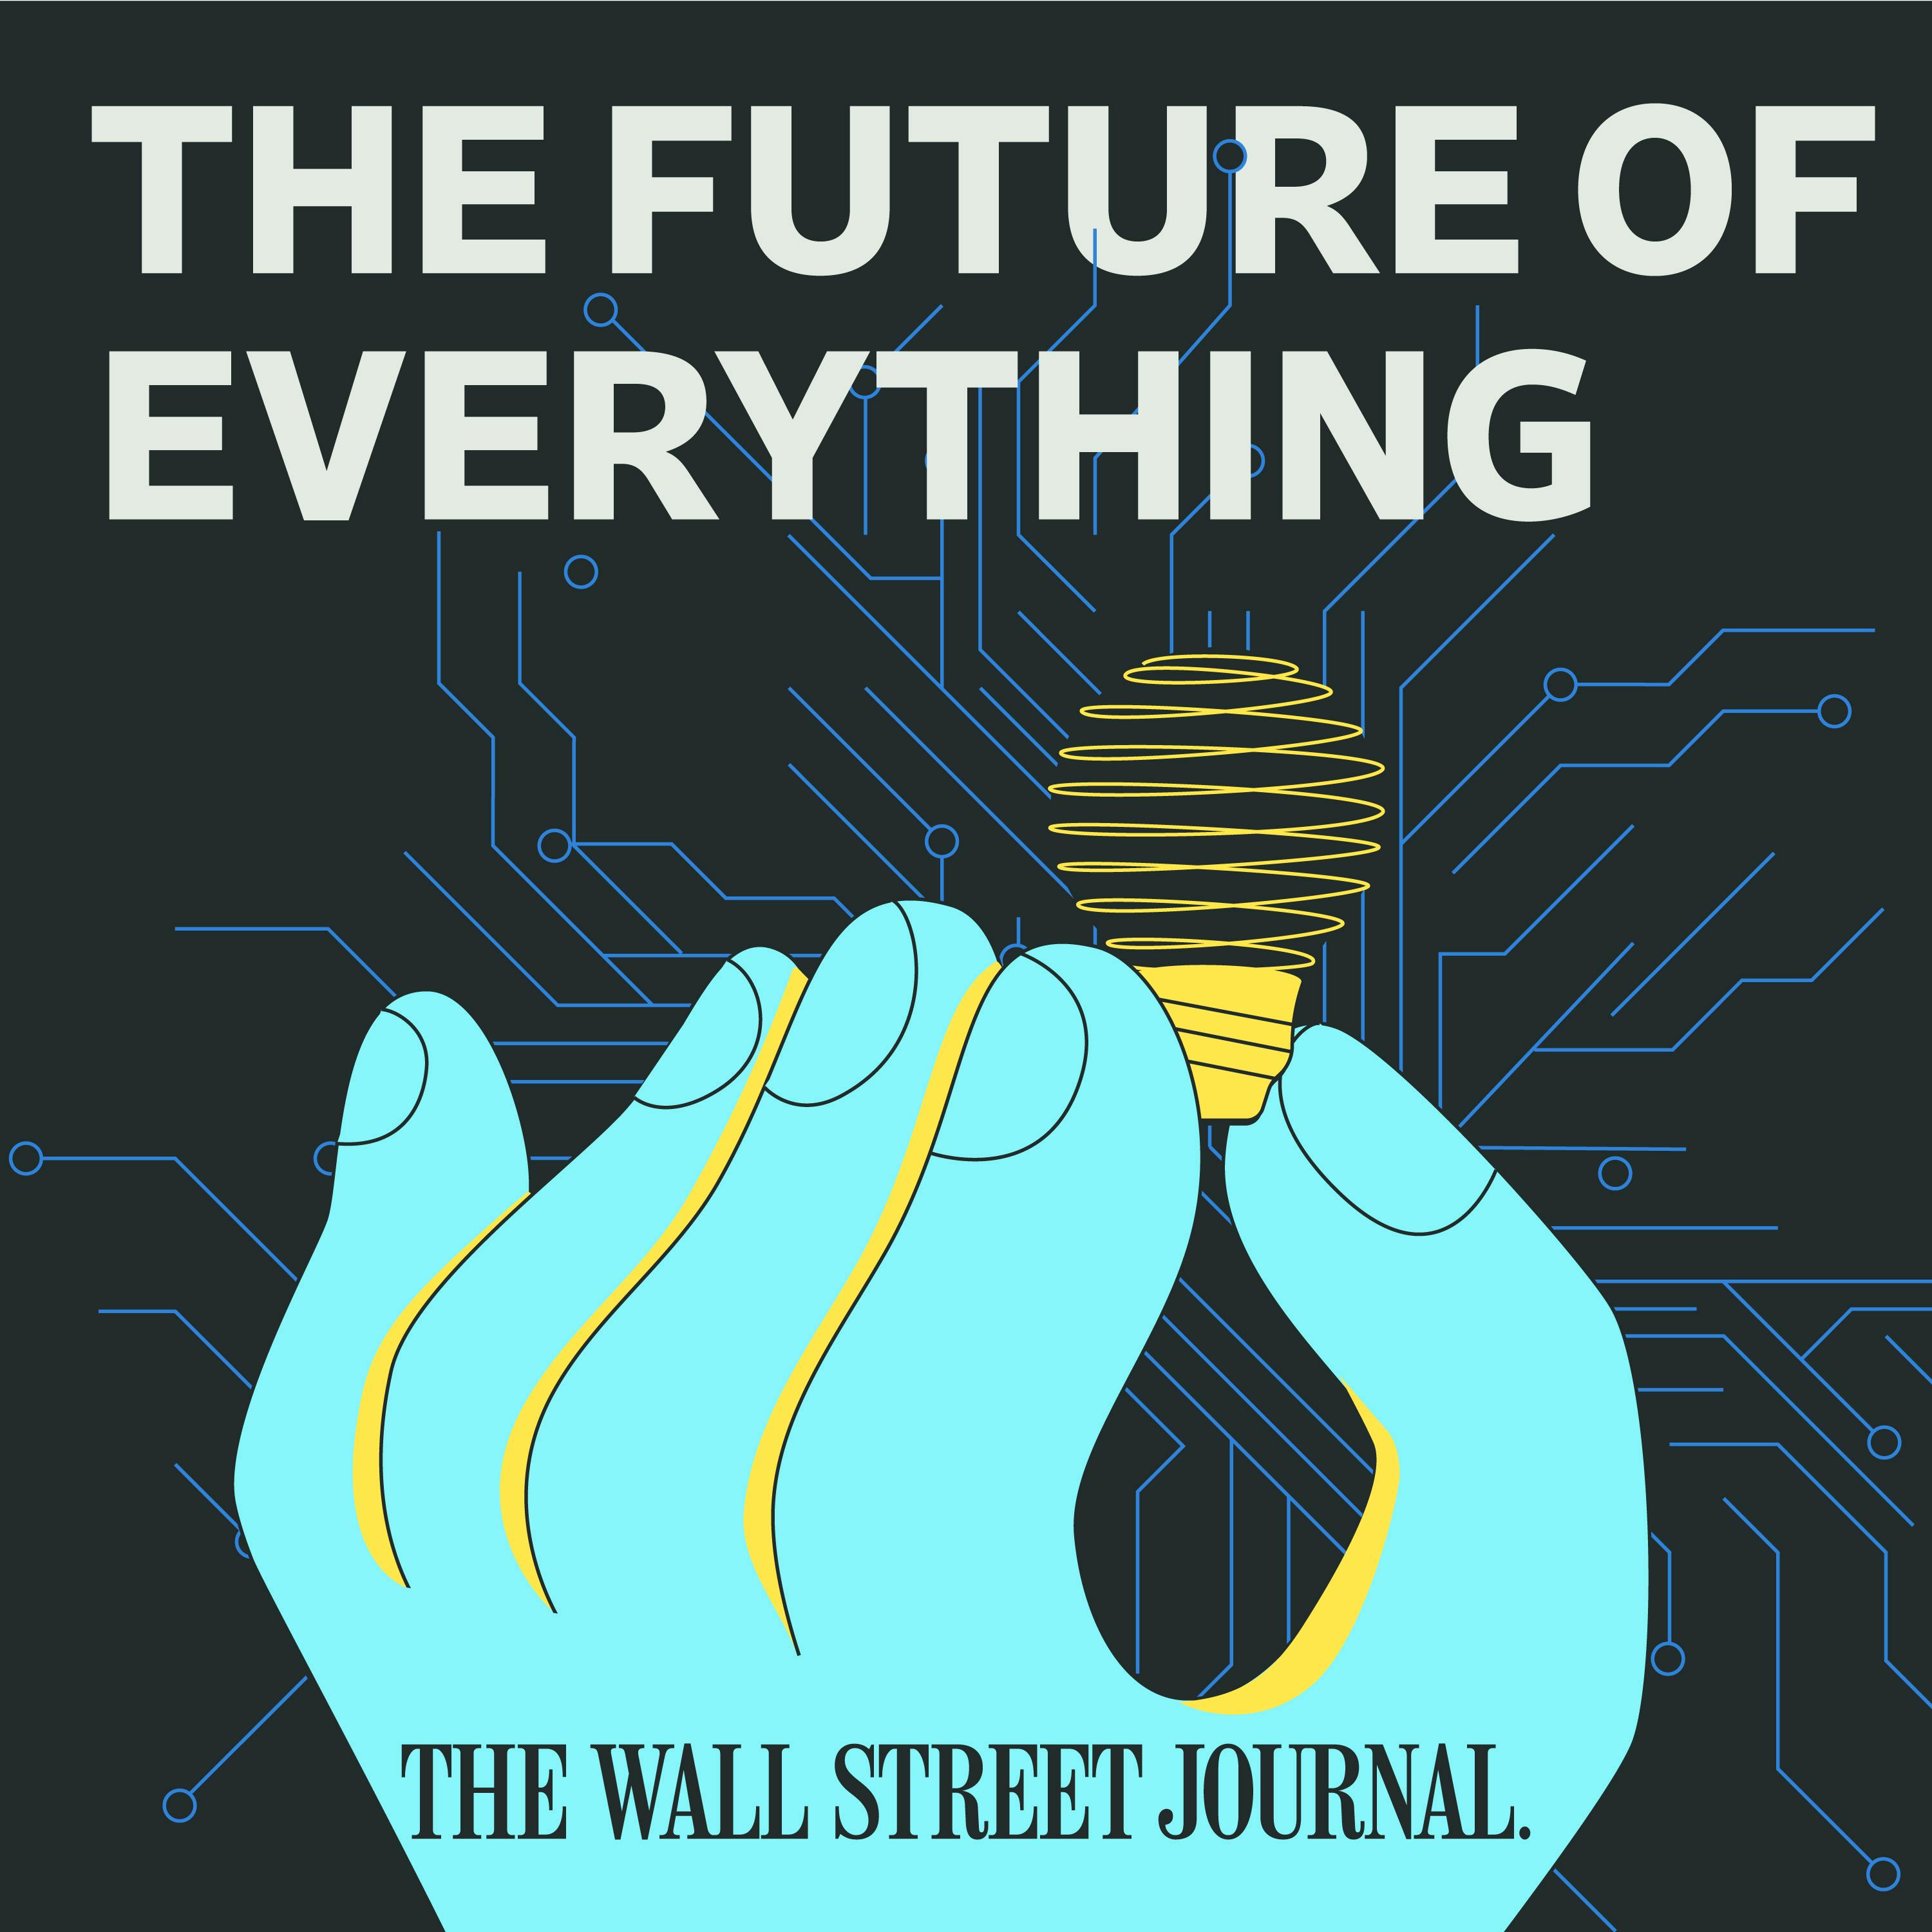 WSJ’s The Future of Everything podcast